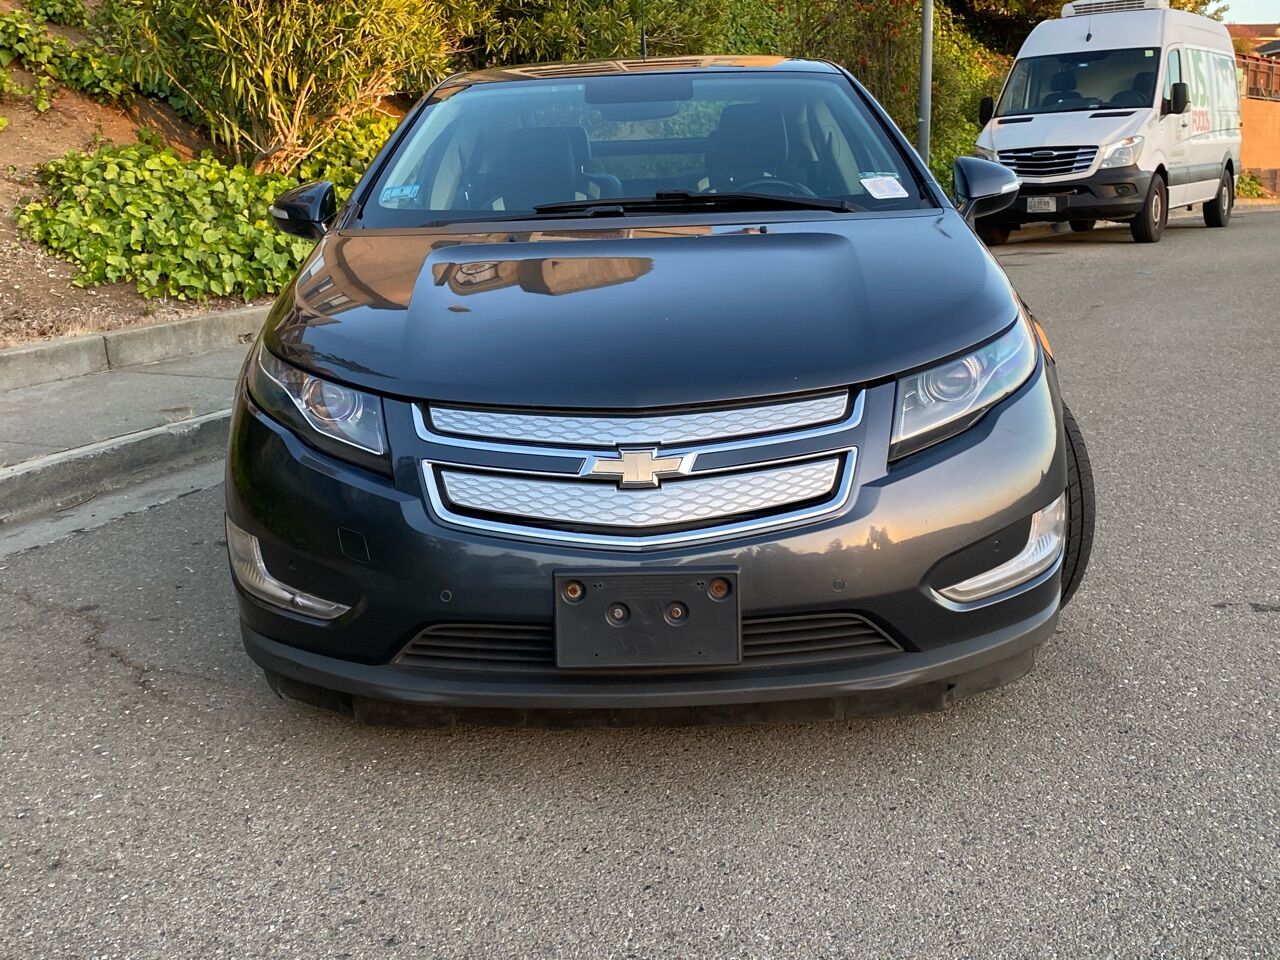 Used 2012 Chevrolet Volt For Sale